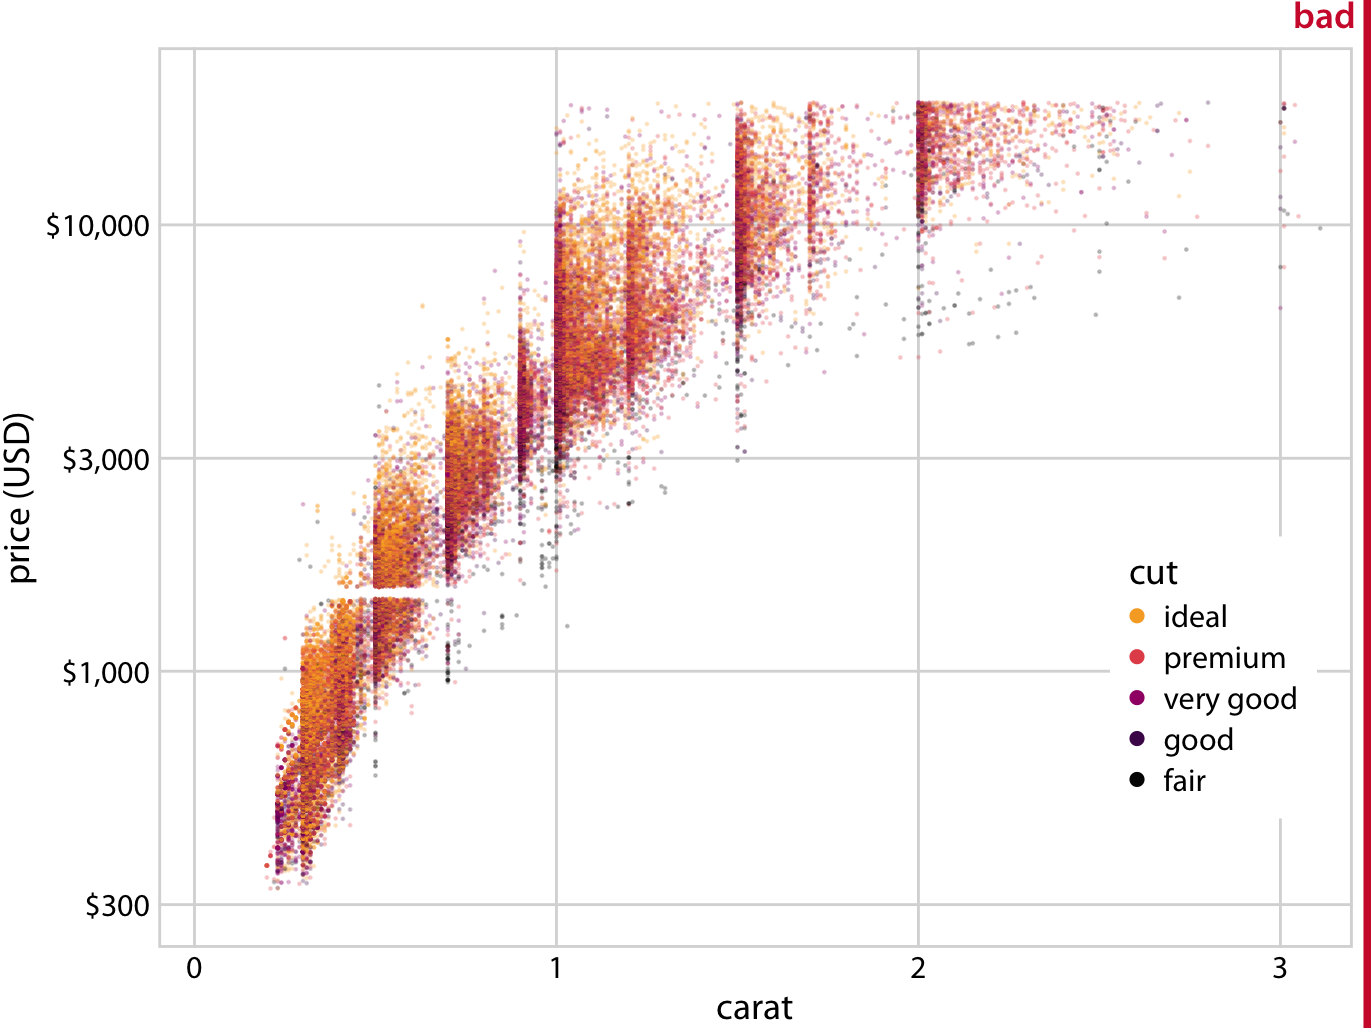 Price of diamonds versus their carat value, for 53,940 individual diamonds. Each diamond’s cut is indicated by color. The plot is labeled as “bad” because the extensive overplotting makes it impossible to discern any patterns among the different diamond cuts. Data source: Hadley Wickham, ggplot2